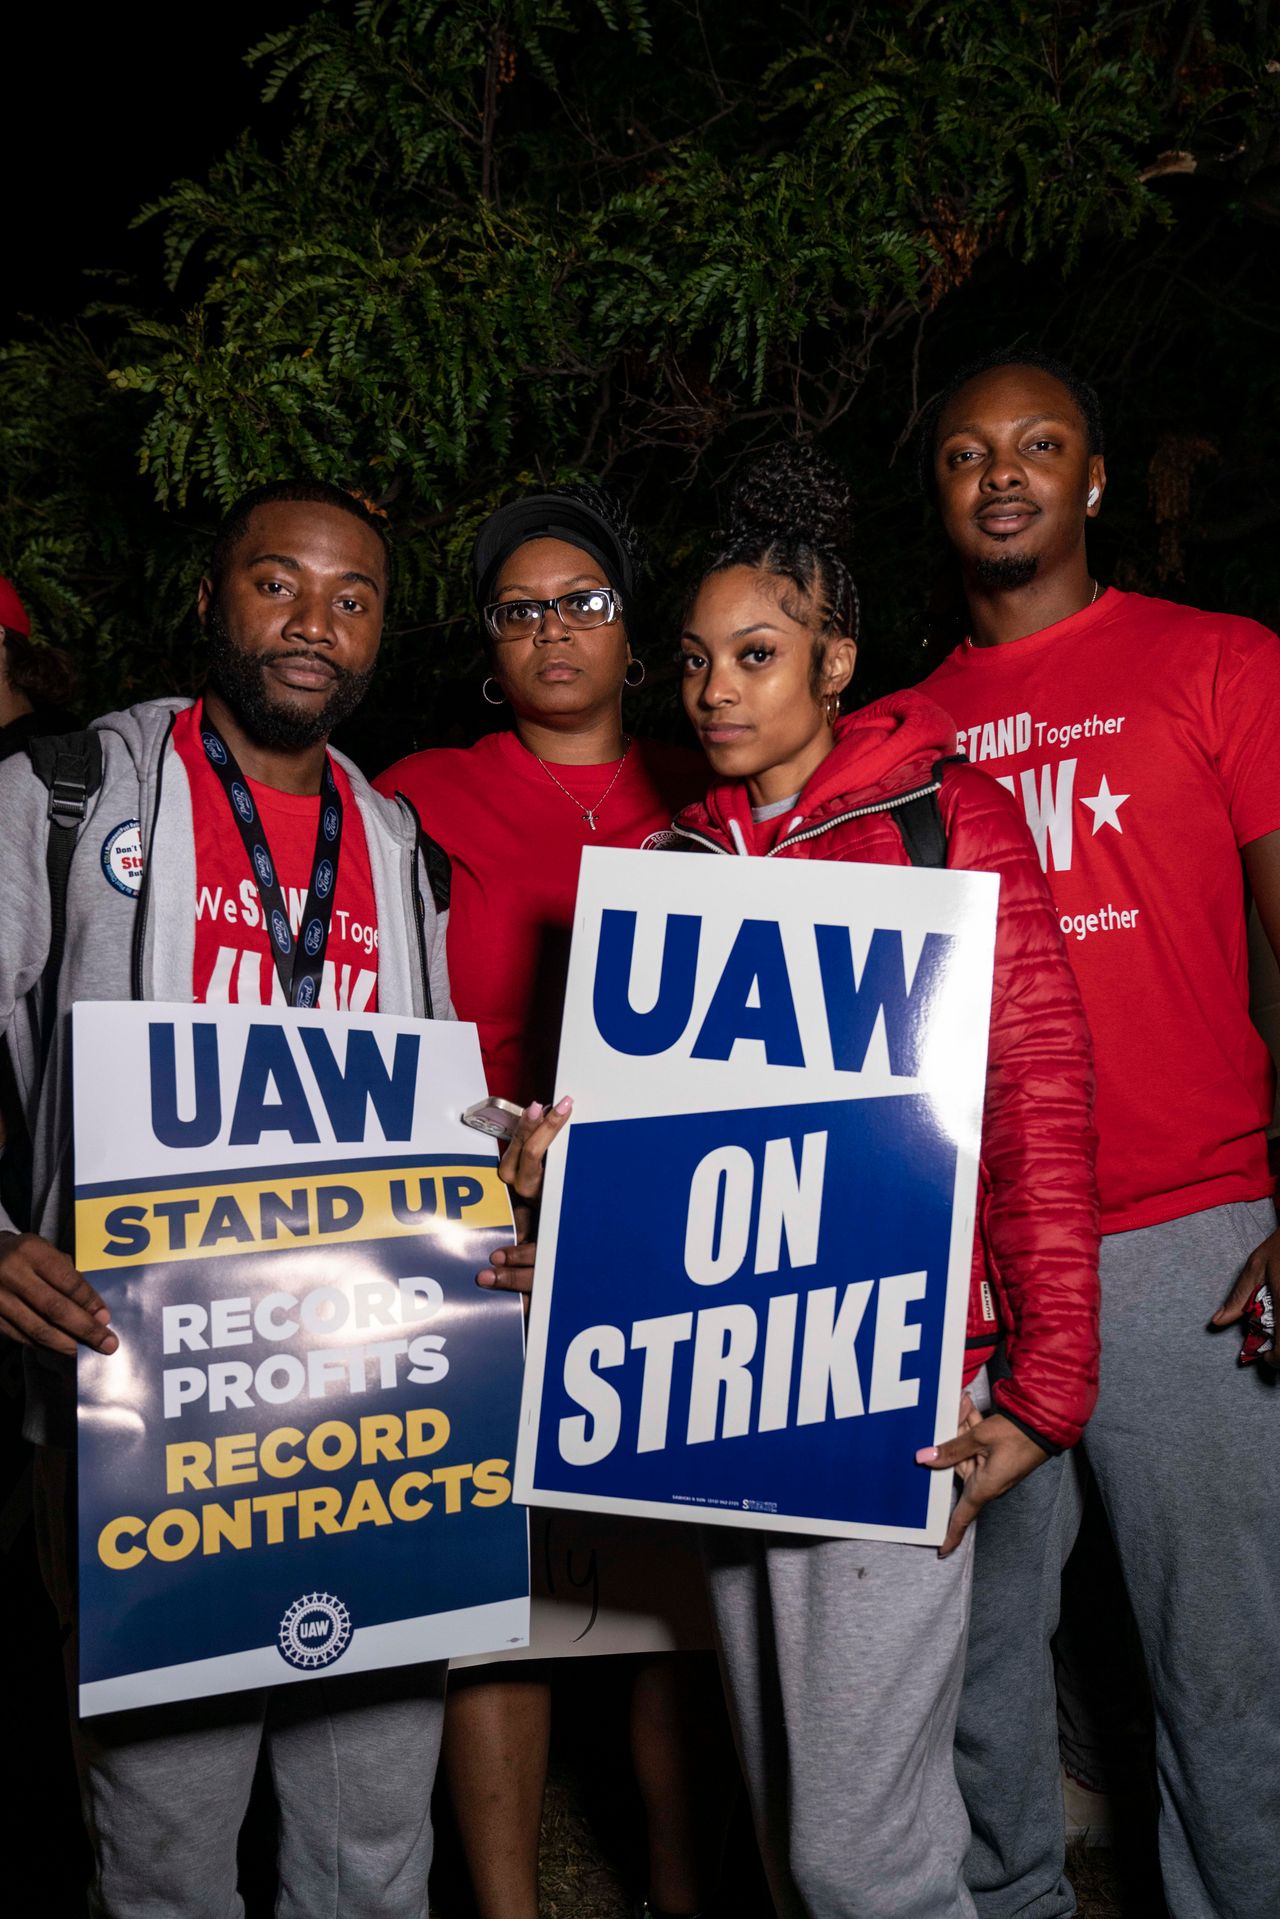 The strike at the Wayne plant involves more than 3,000 workers.